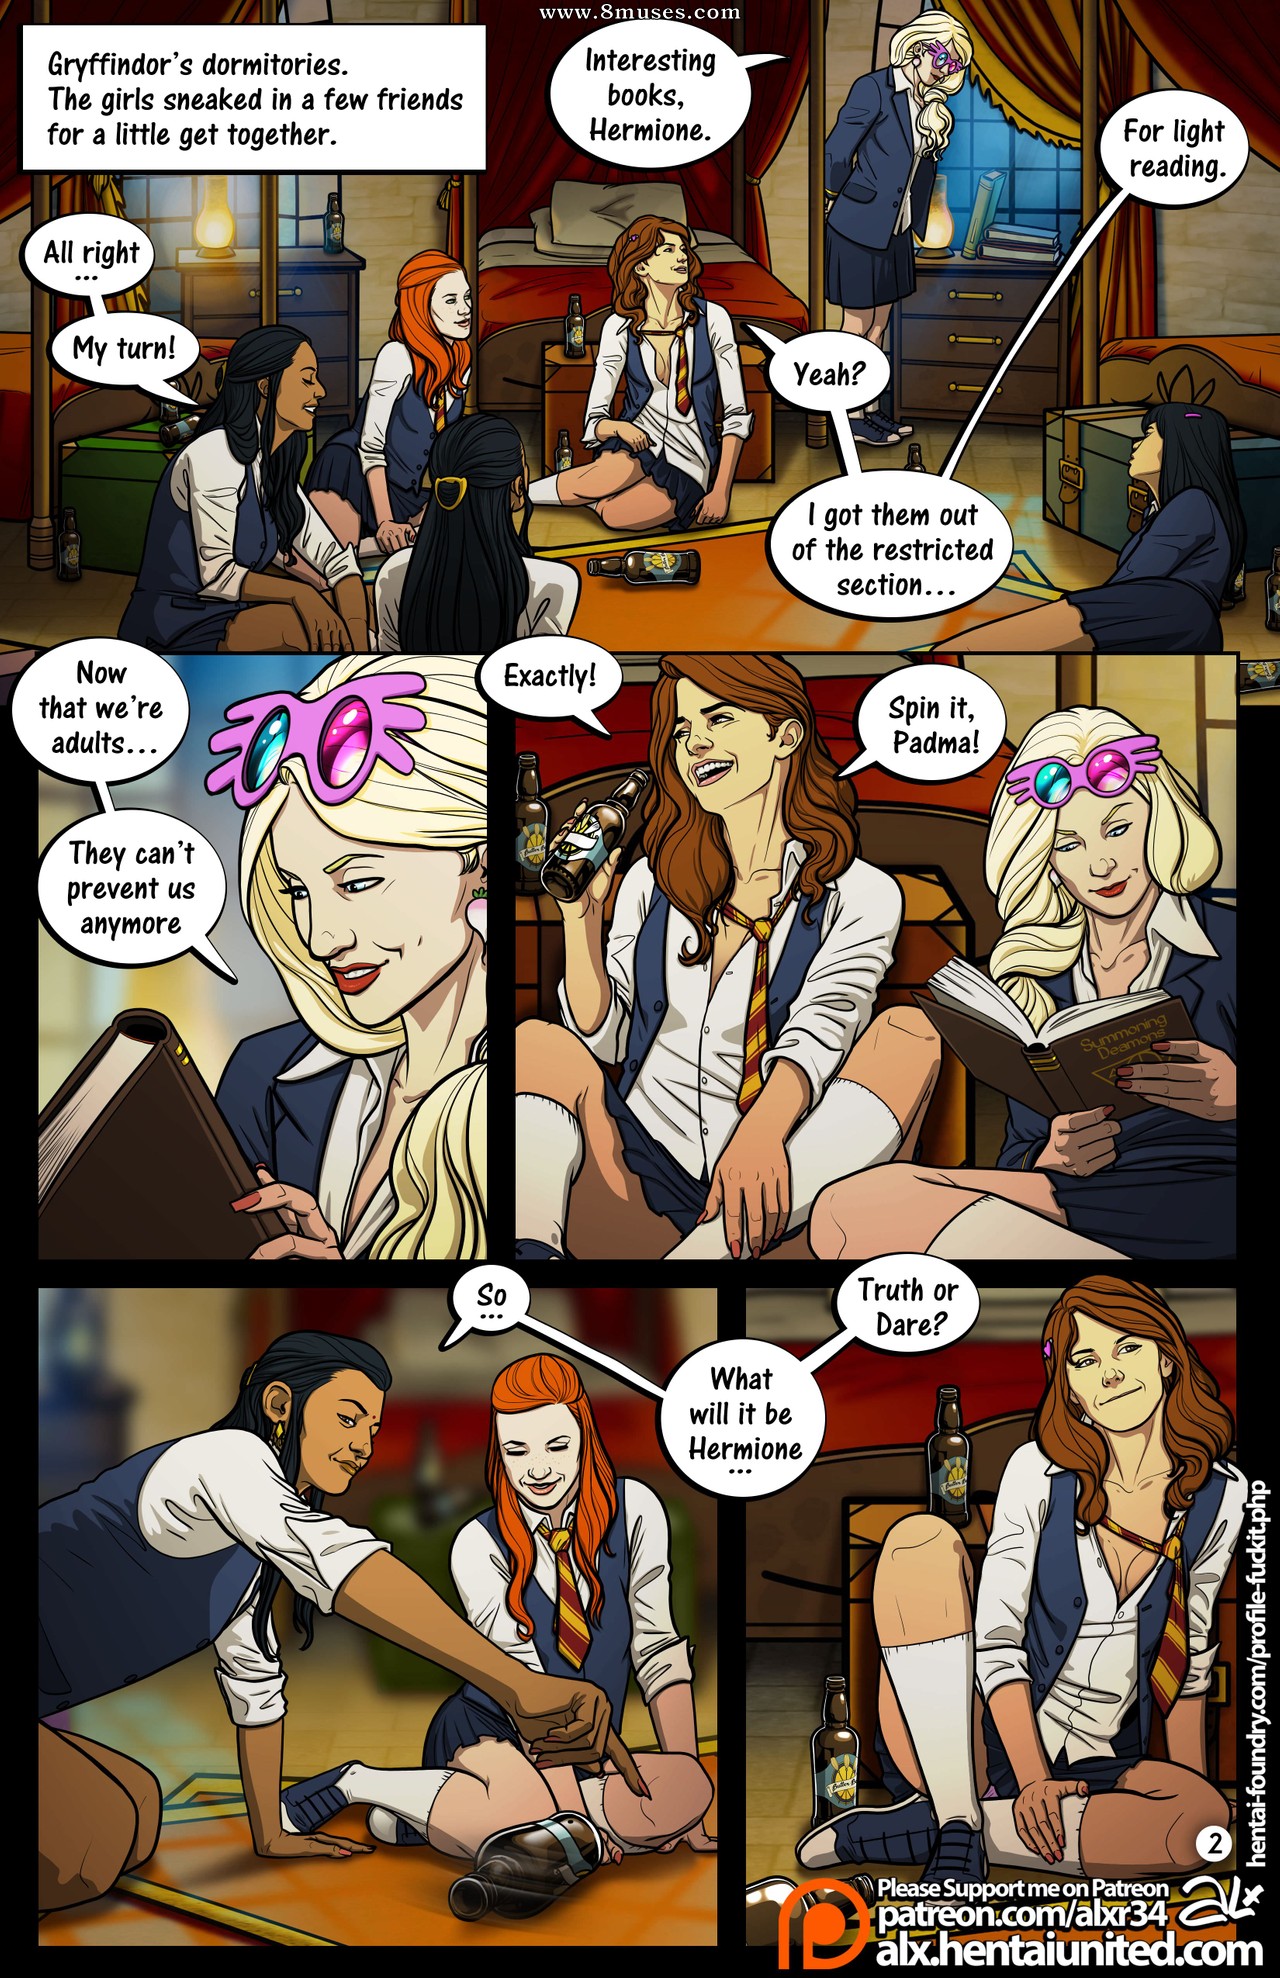 Harry Potter - Meanwhile in Hogwarts - Truth or Dare Issue 1 - 8muses Comics  - Sex Comics and Porn Cartoons